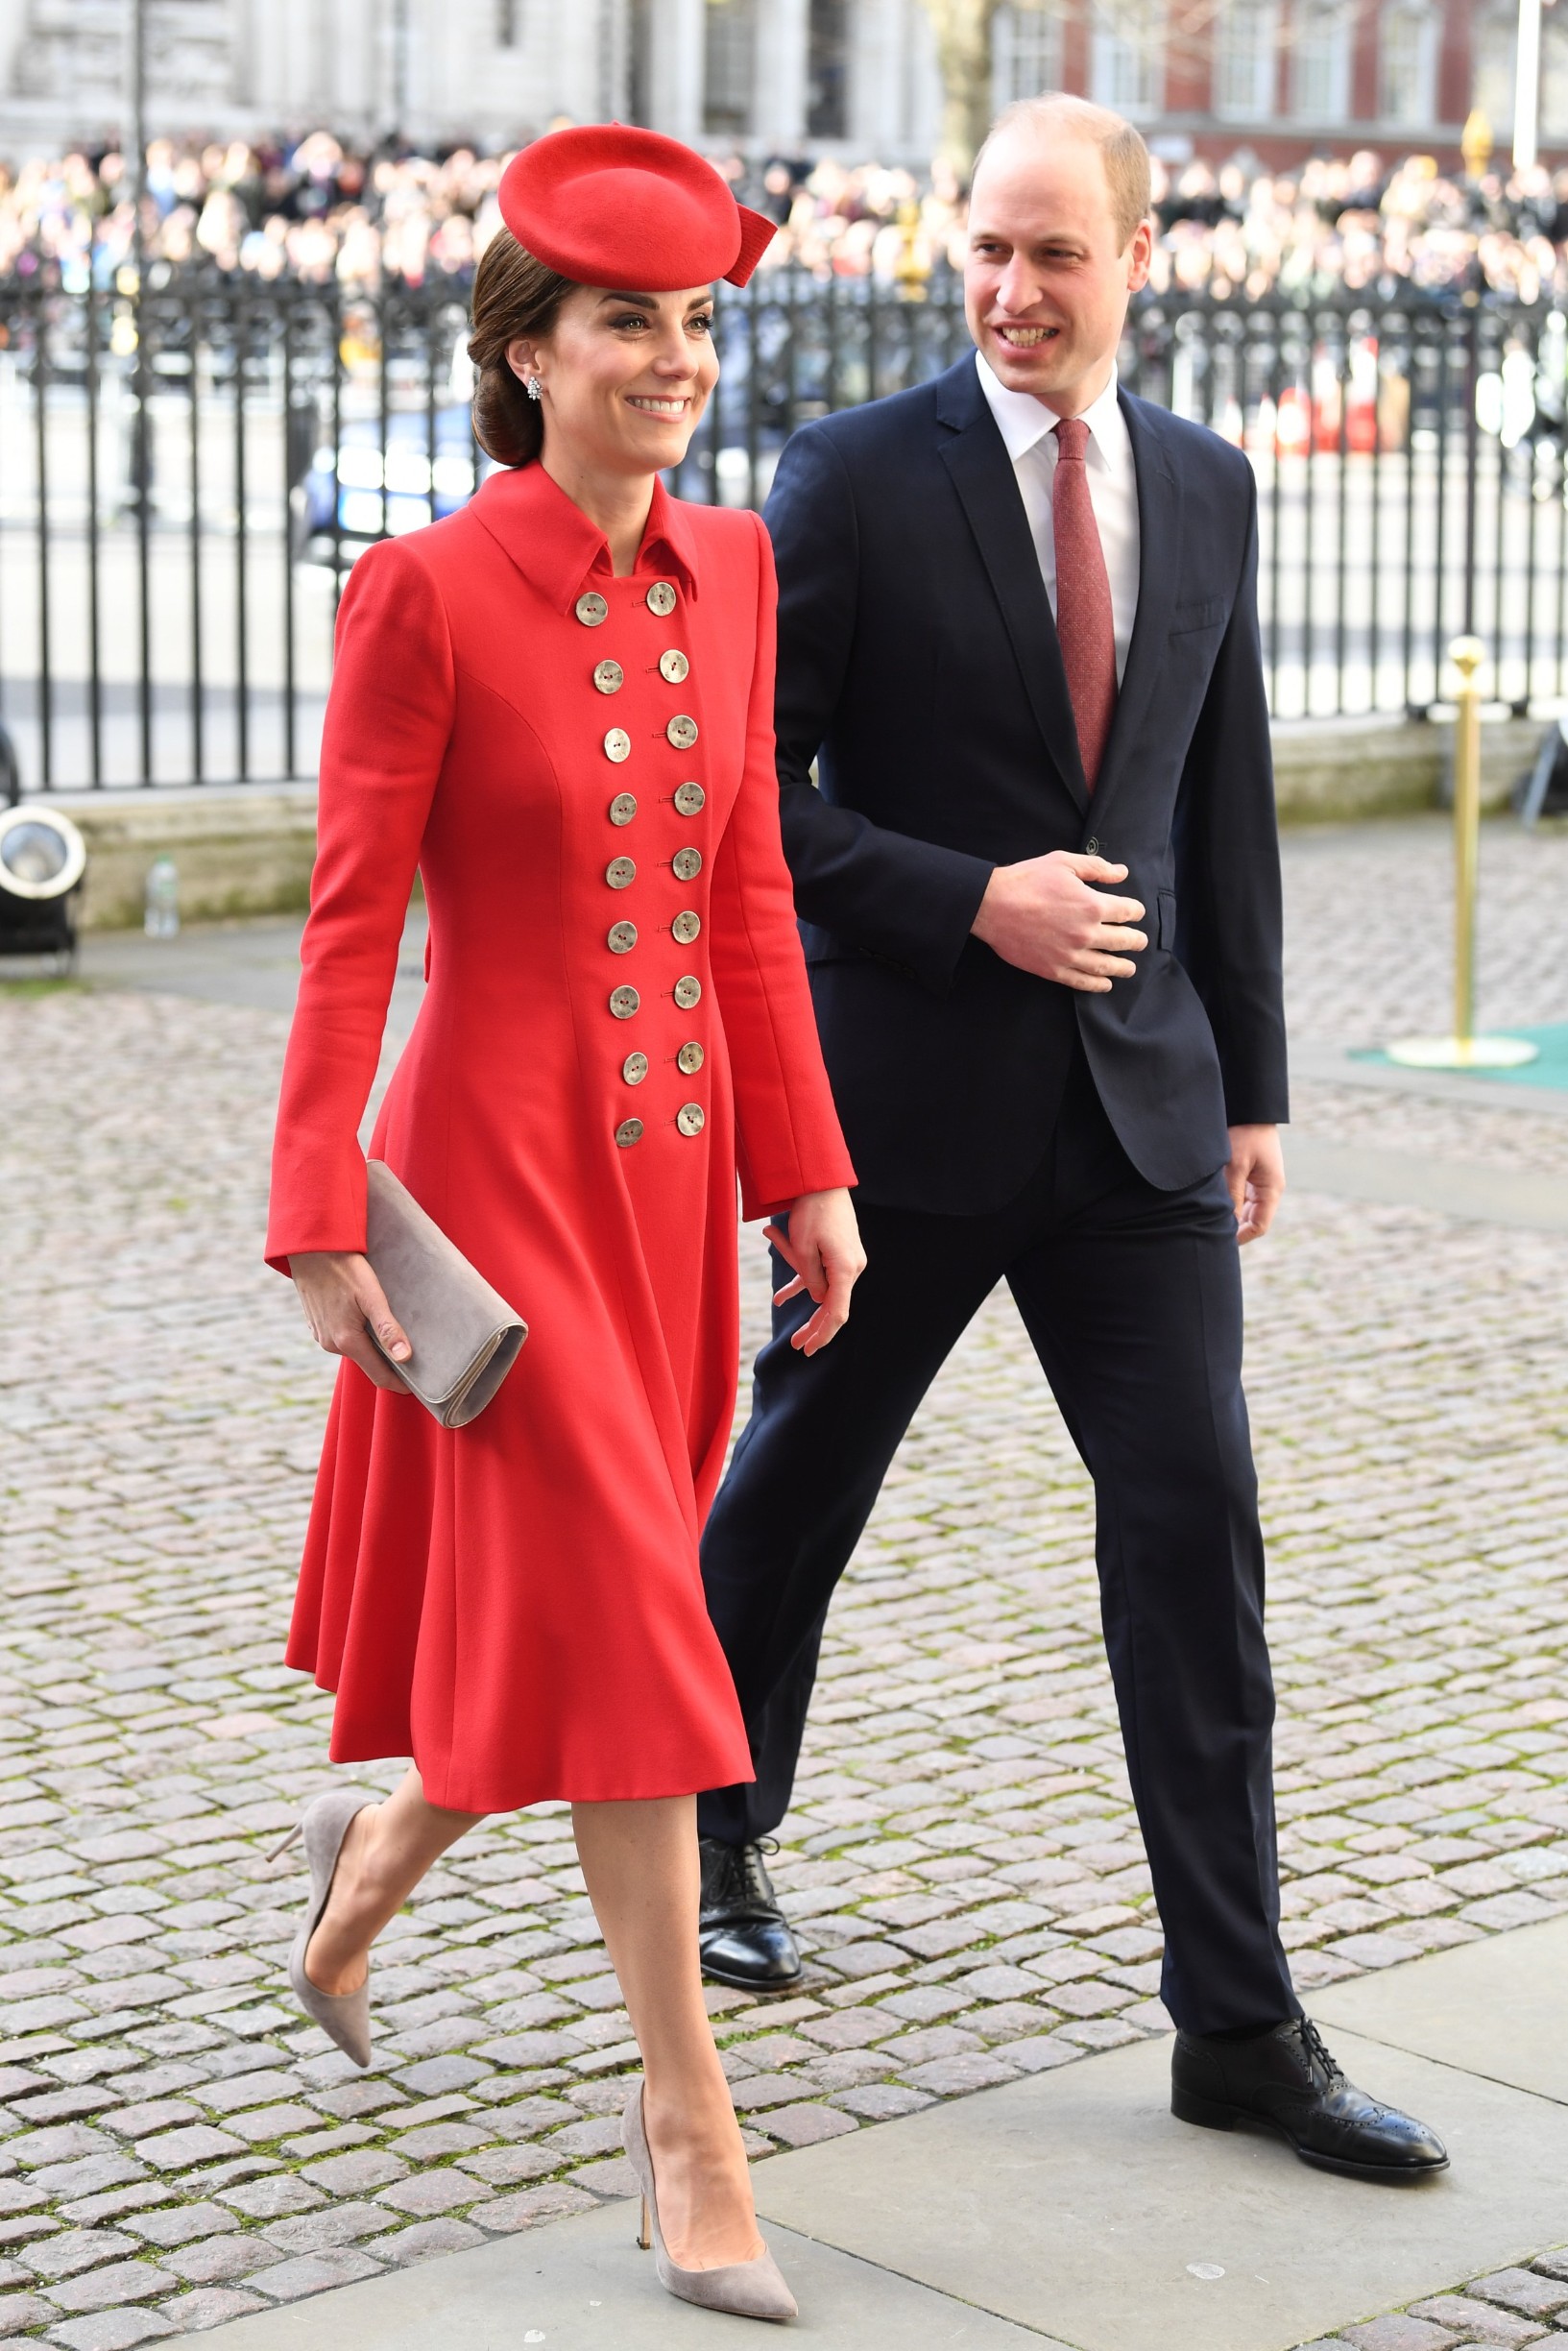 Members of The Royal Family attend the Commonwealth Service on Commonwealth Day, at Westminster Abbey, London, UK, on the 11th March 2019.
11 Mar 2019, Image: 418769665, License: Rights-managed, Restrictions: NO United Kingdom, Model Release: no, Credit line: James Whatling / The Mega Agency / Profimedia